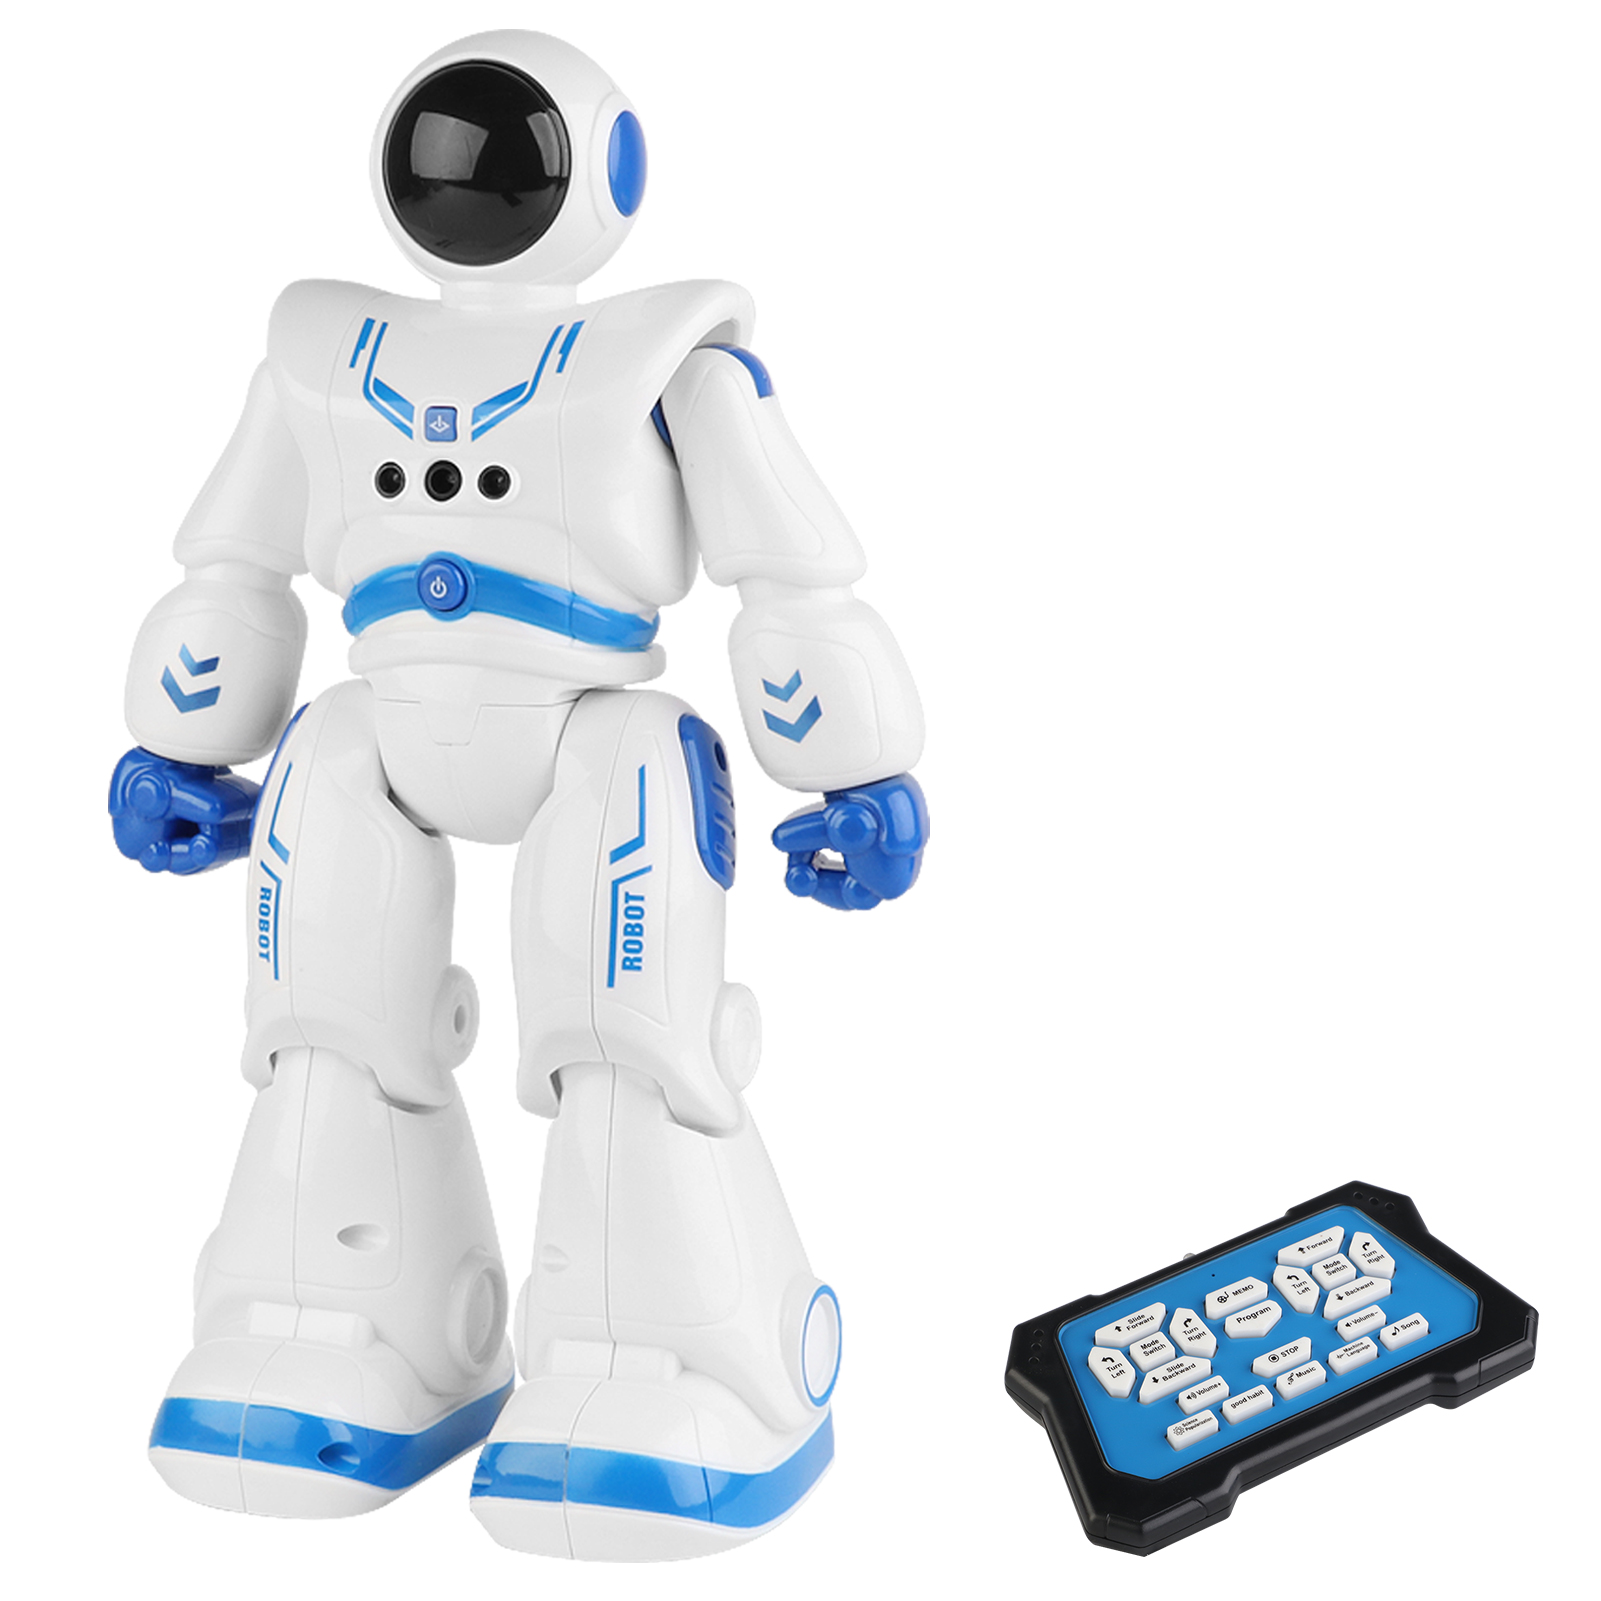 Dcenta Smart Intelligent Robot Toy (Blue and White) - image 1 of 7